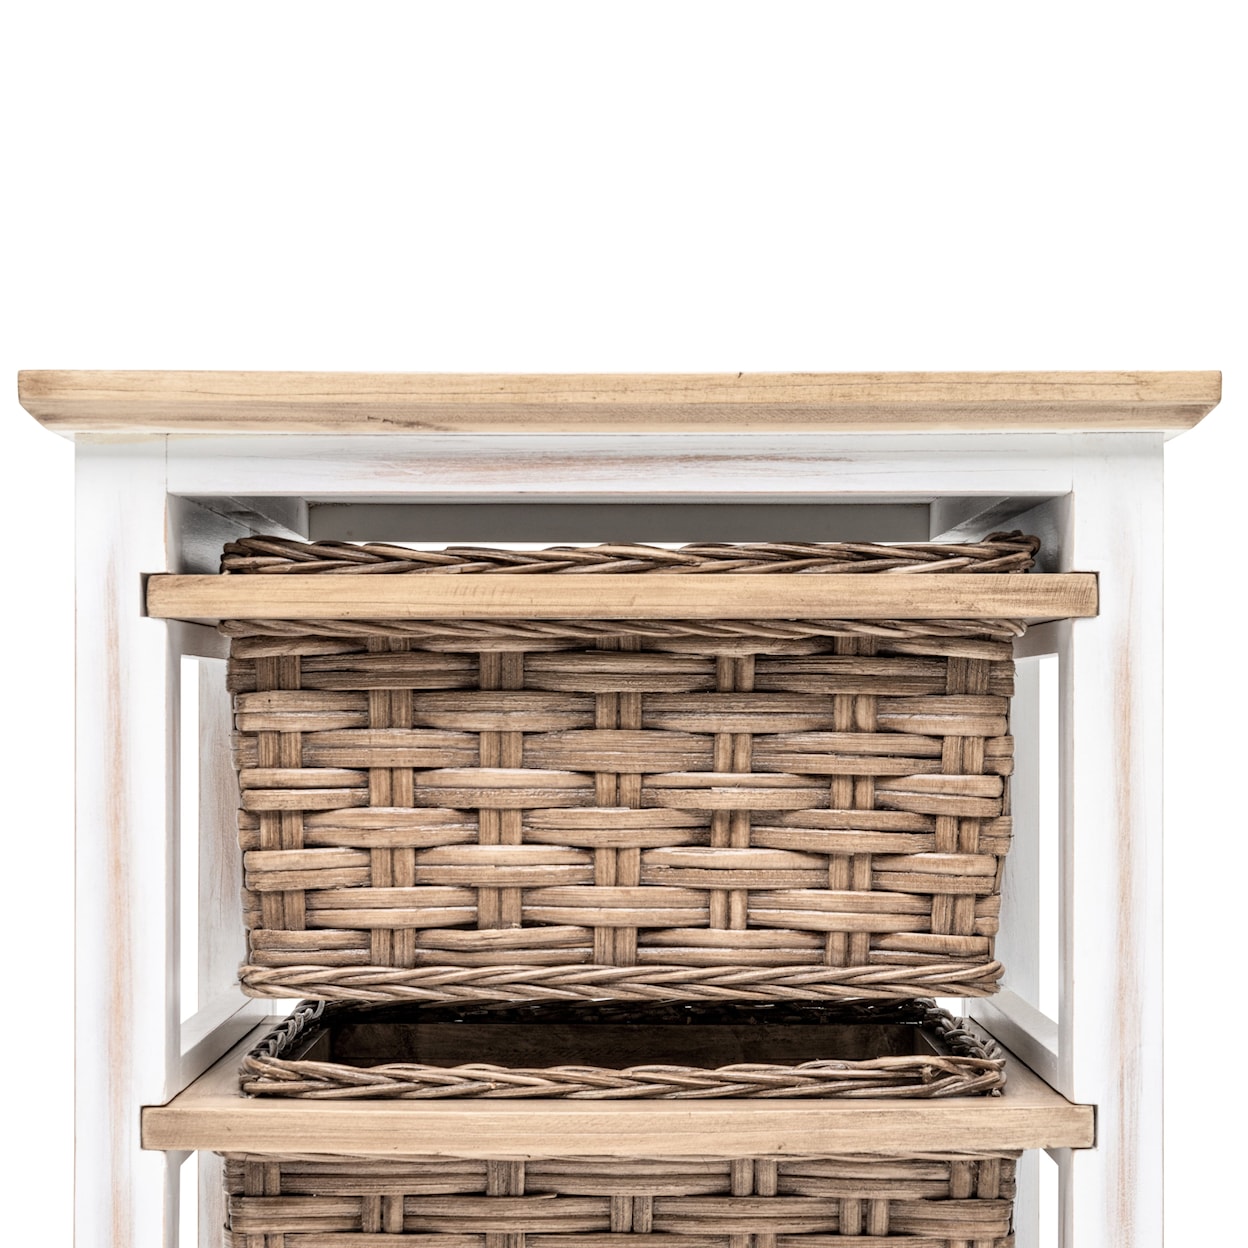 Sea Winds Trading Company Island Breeze Accent Basket Cabinet